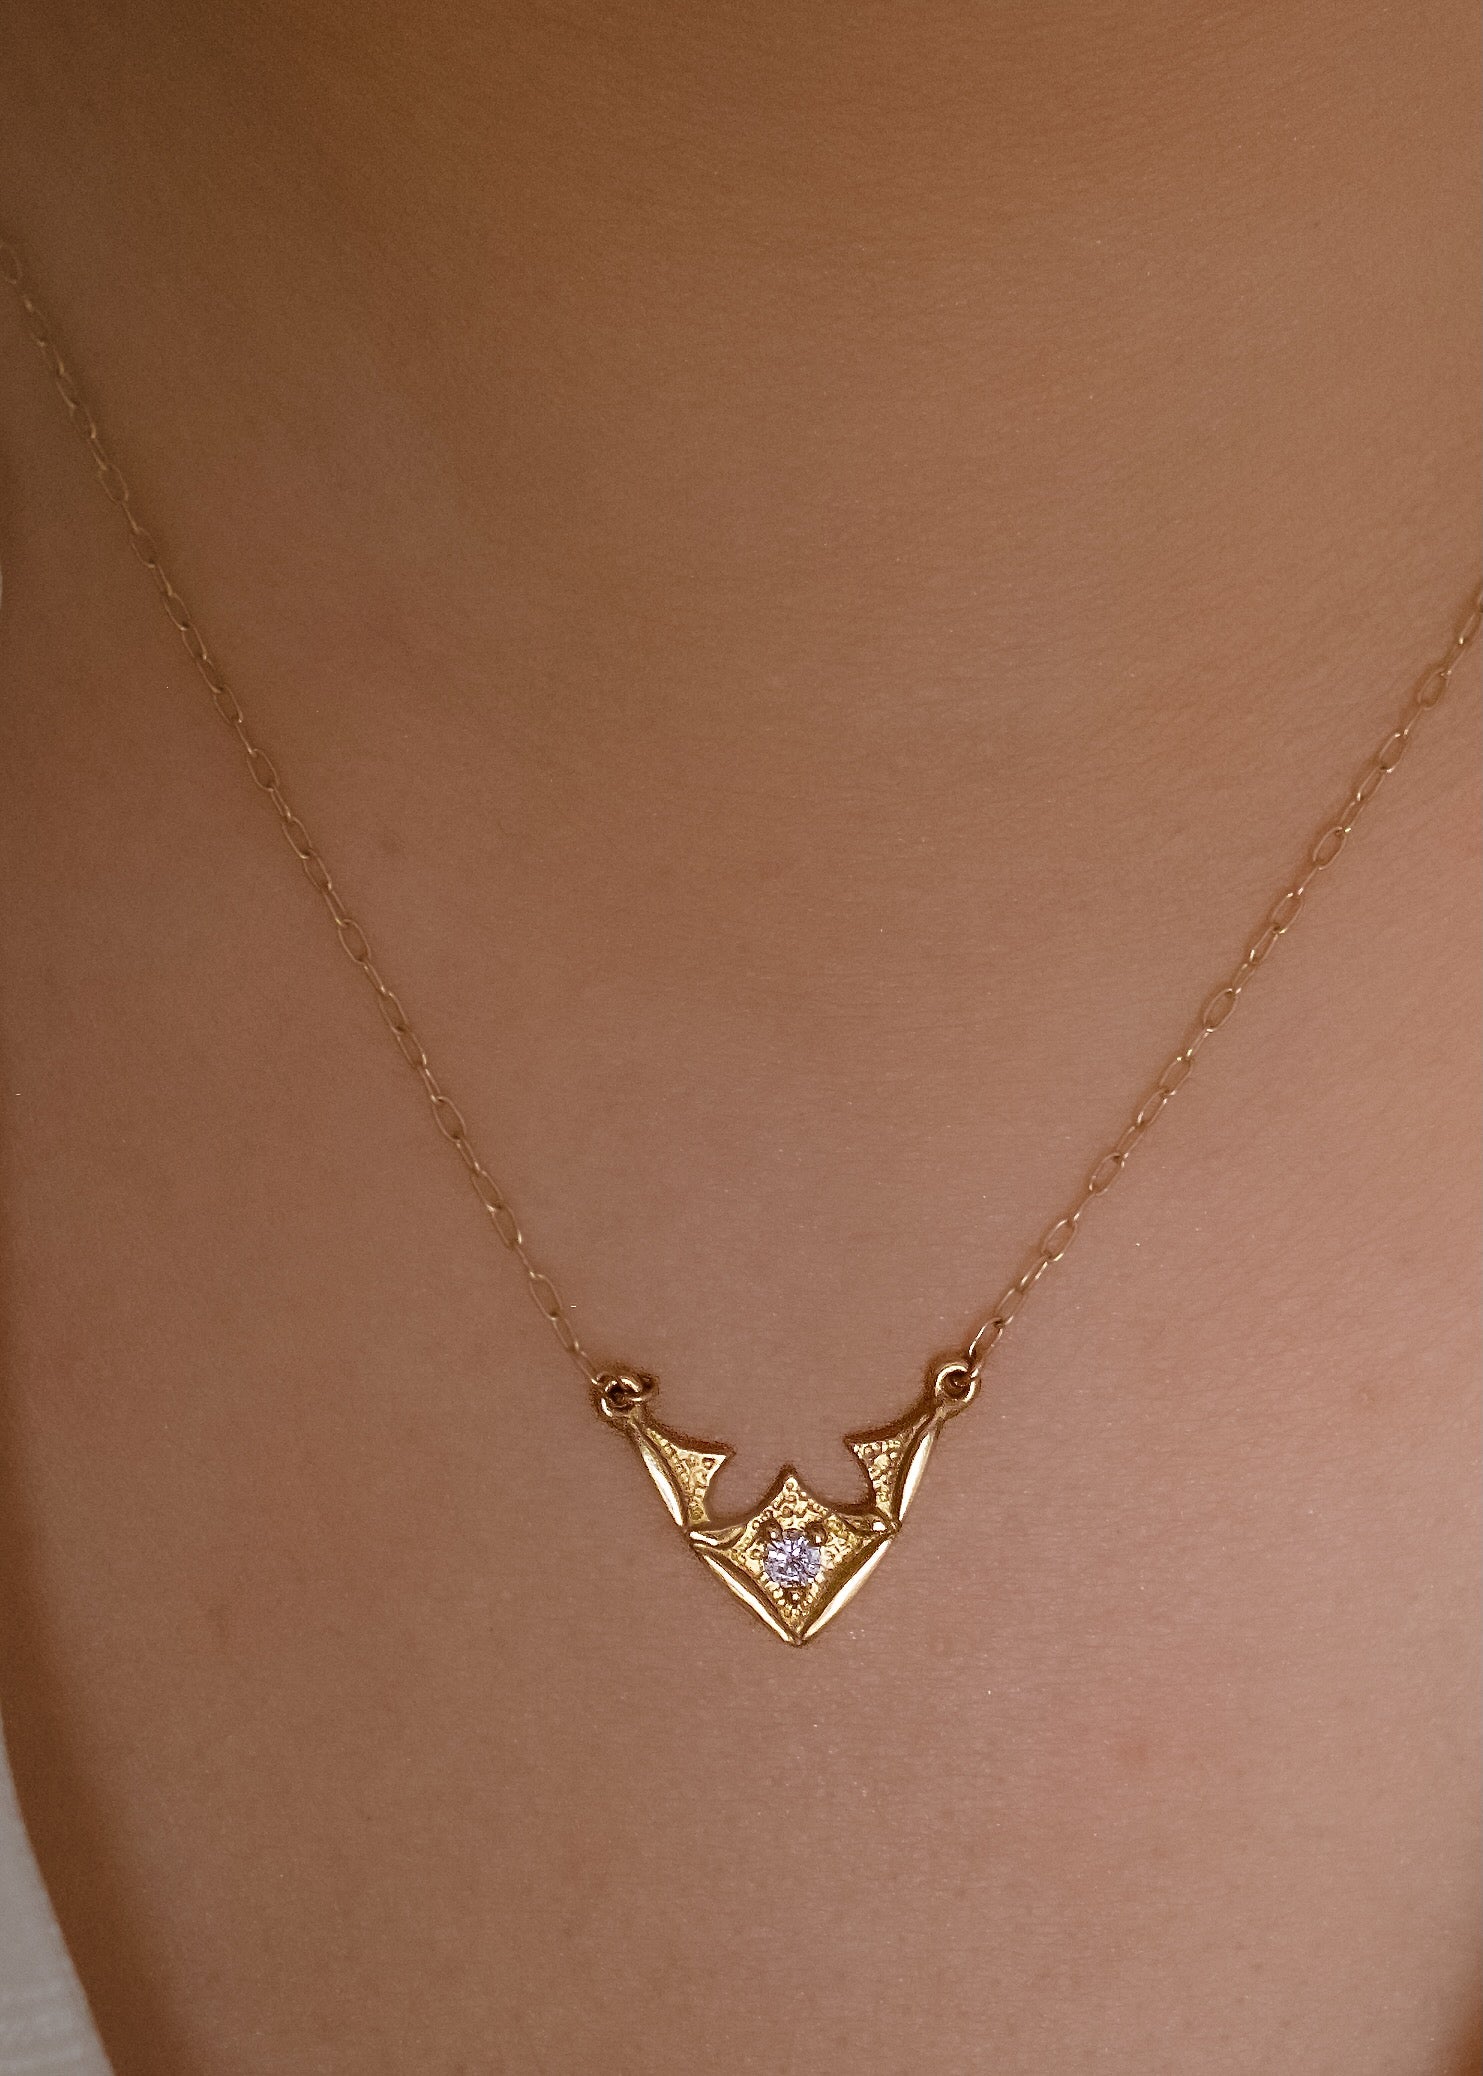 Taken from the French word for “vault,” the Volta necklace is an homage to the Gothic architecture of Paris. Gentle sloping curves give way to acute points, evoking the grandeur of a centuries-old cathedral ceiling. A single diamond catches the eye, complemented by ornate texture and delicate beading—a necklace that transcends time and transports the imagination.